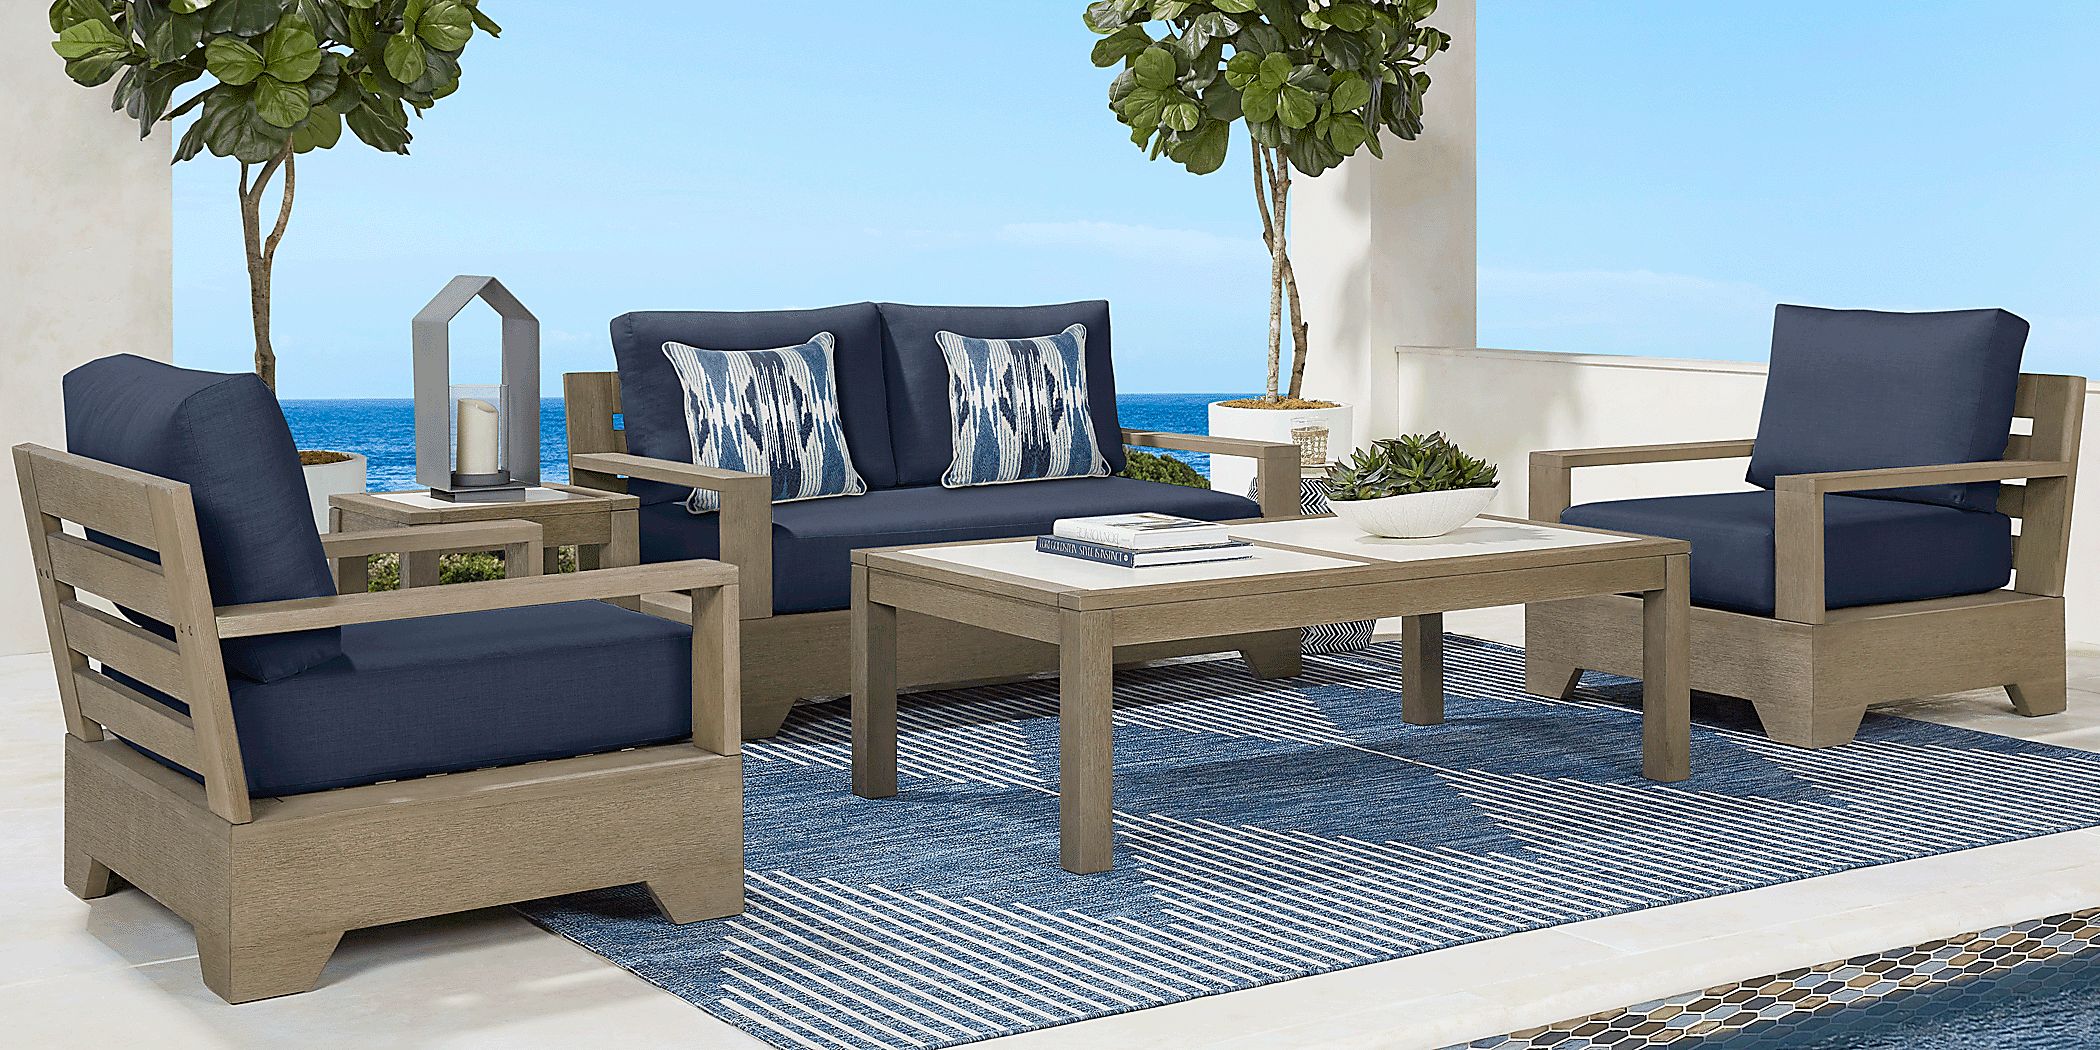 Cindy Crawford Home Lake Tahoe Gray 4 Pc Outdoor Loveseat Seating Set with Indigo Cushions